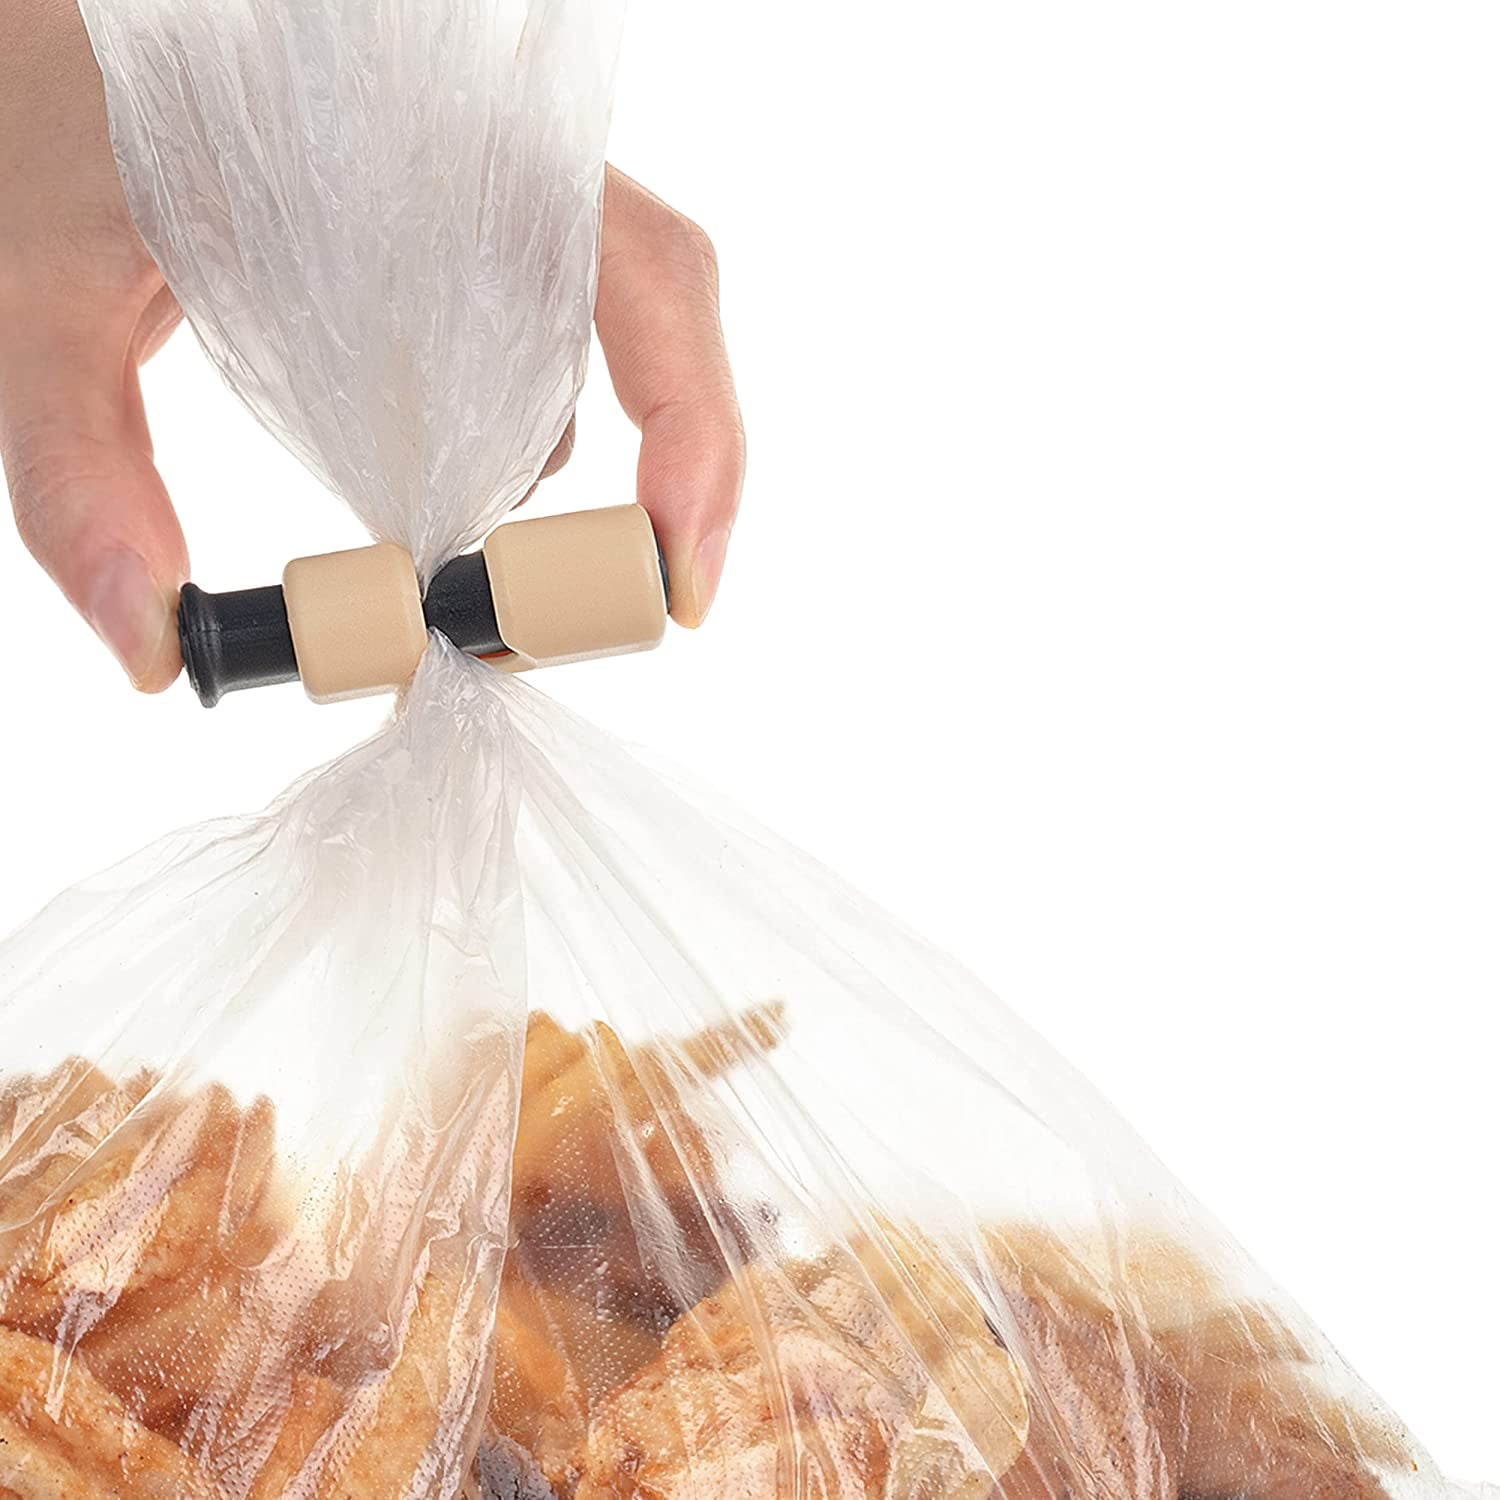  Mr. Pen- Bag Clips, 8 Pack, Squeeze and Lock Bread Bag Clips  for Food Storage, Food Clips for Bags, Bread Clips, Plastic Bag Clip, Bag  Closure Clips, Bread Clips Plastic, Bread